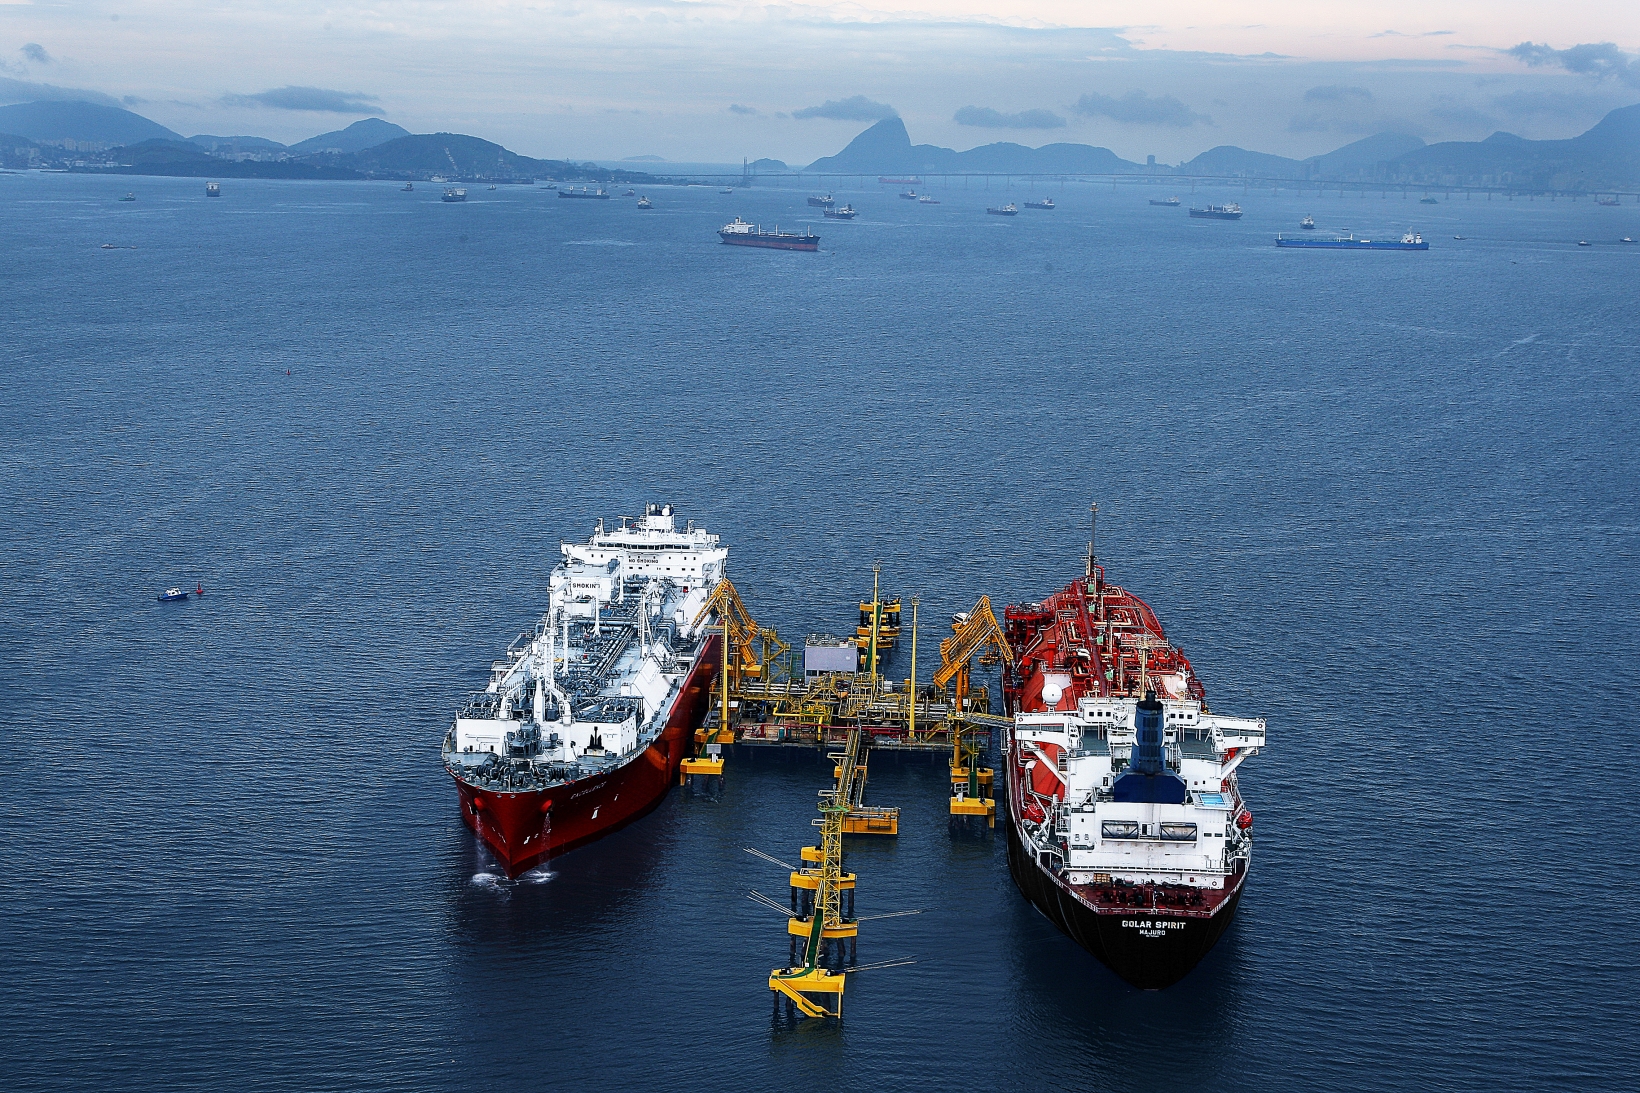 Petrobras completes Guanabara Bay LNG record flowrate test